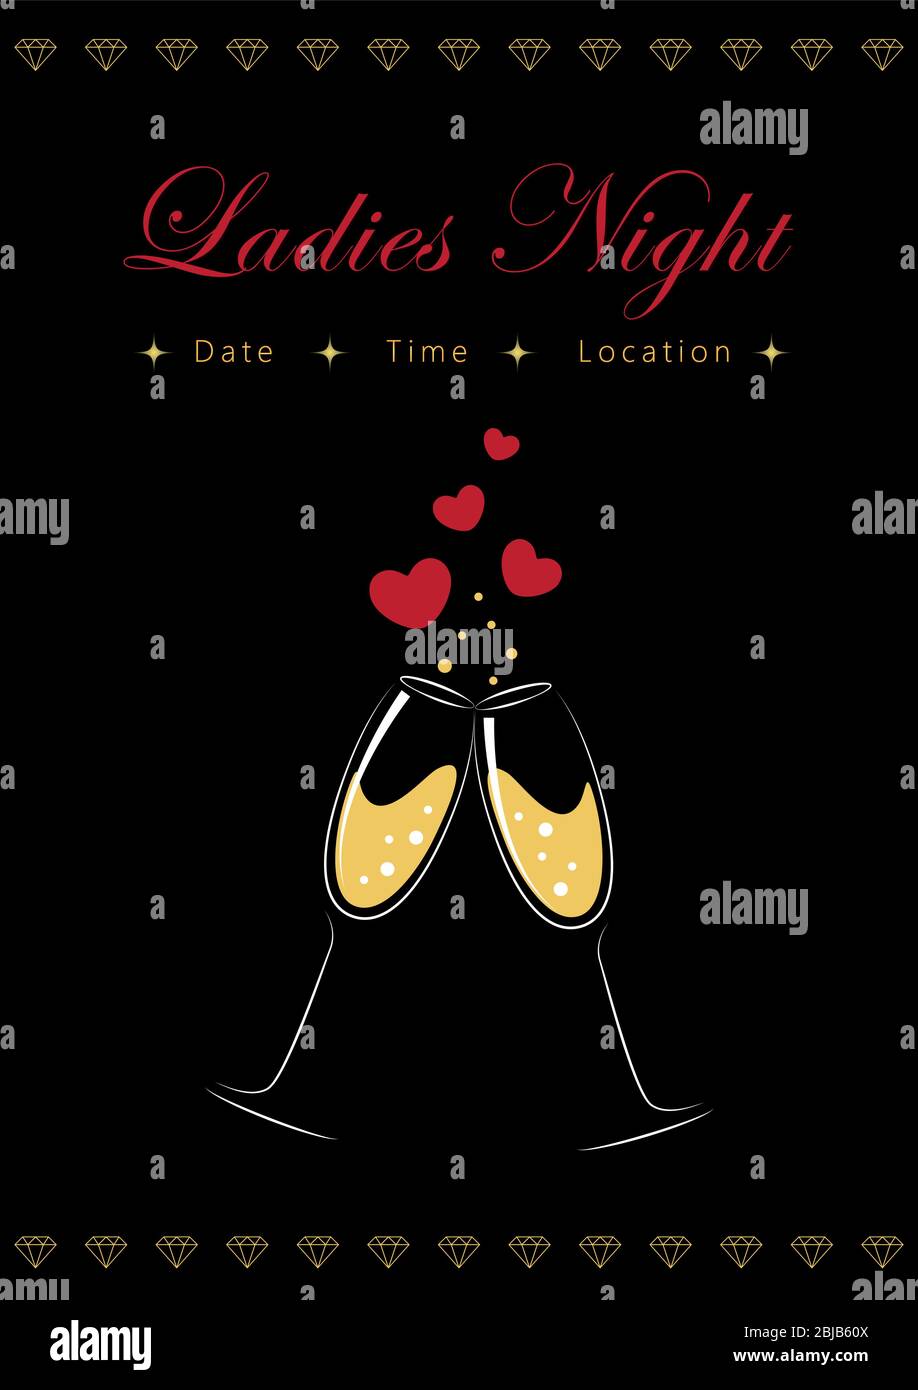 glasses of champagne ladies night poster vector illustration EPS10 Stock Vector